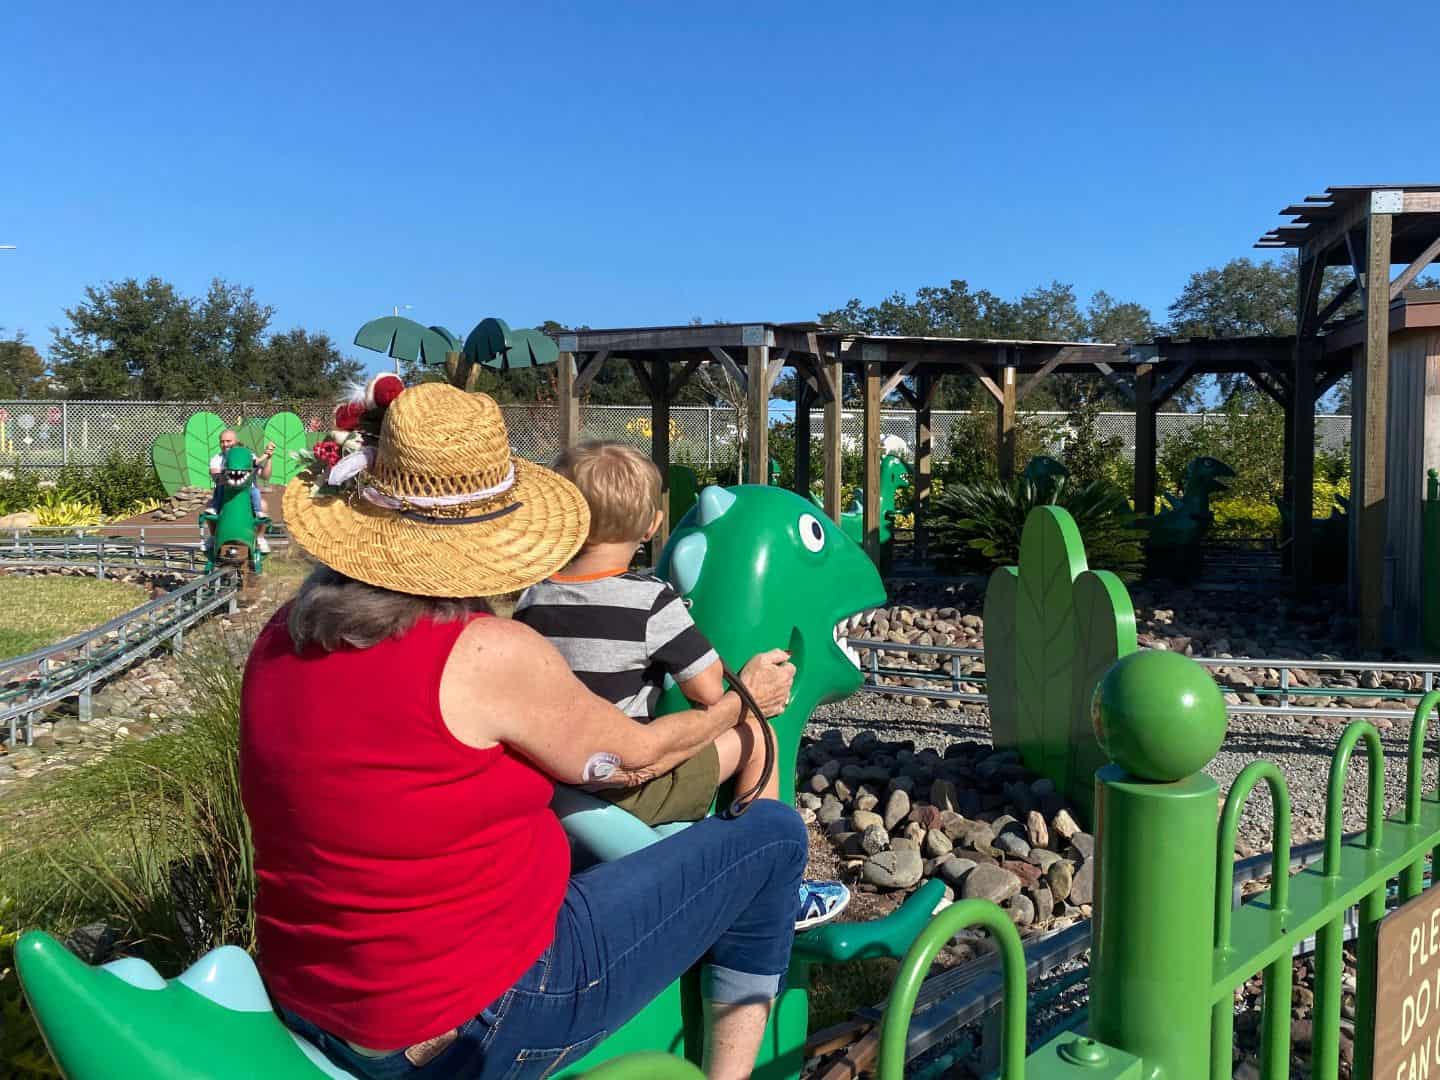 A grandmother and her son ride together on Dinosaur Adventure Ride at Peppa Pig Theme Park